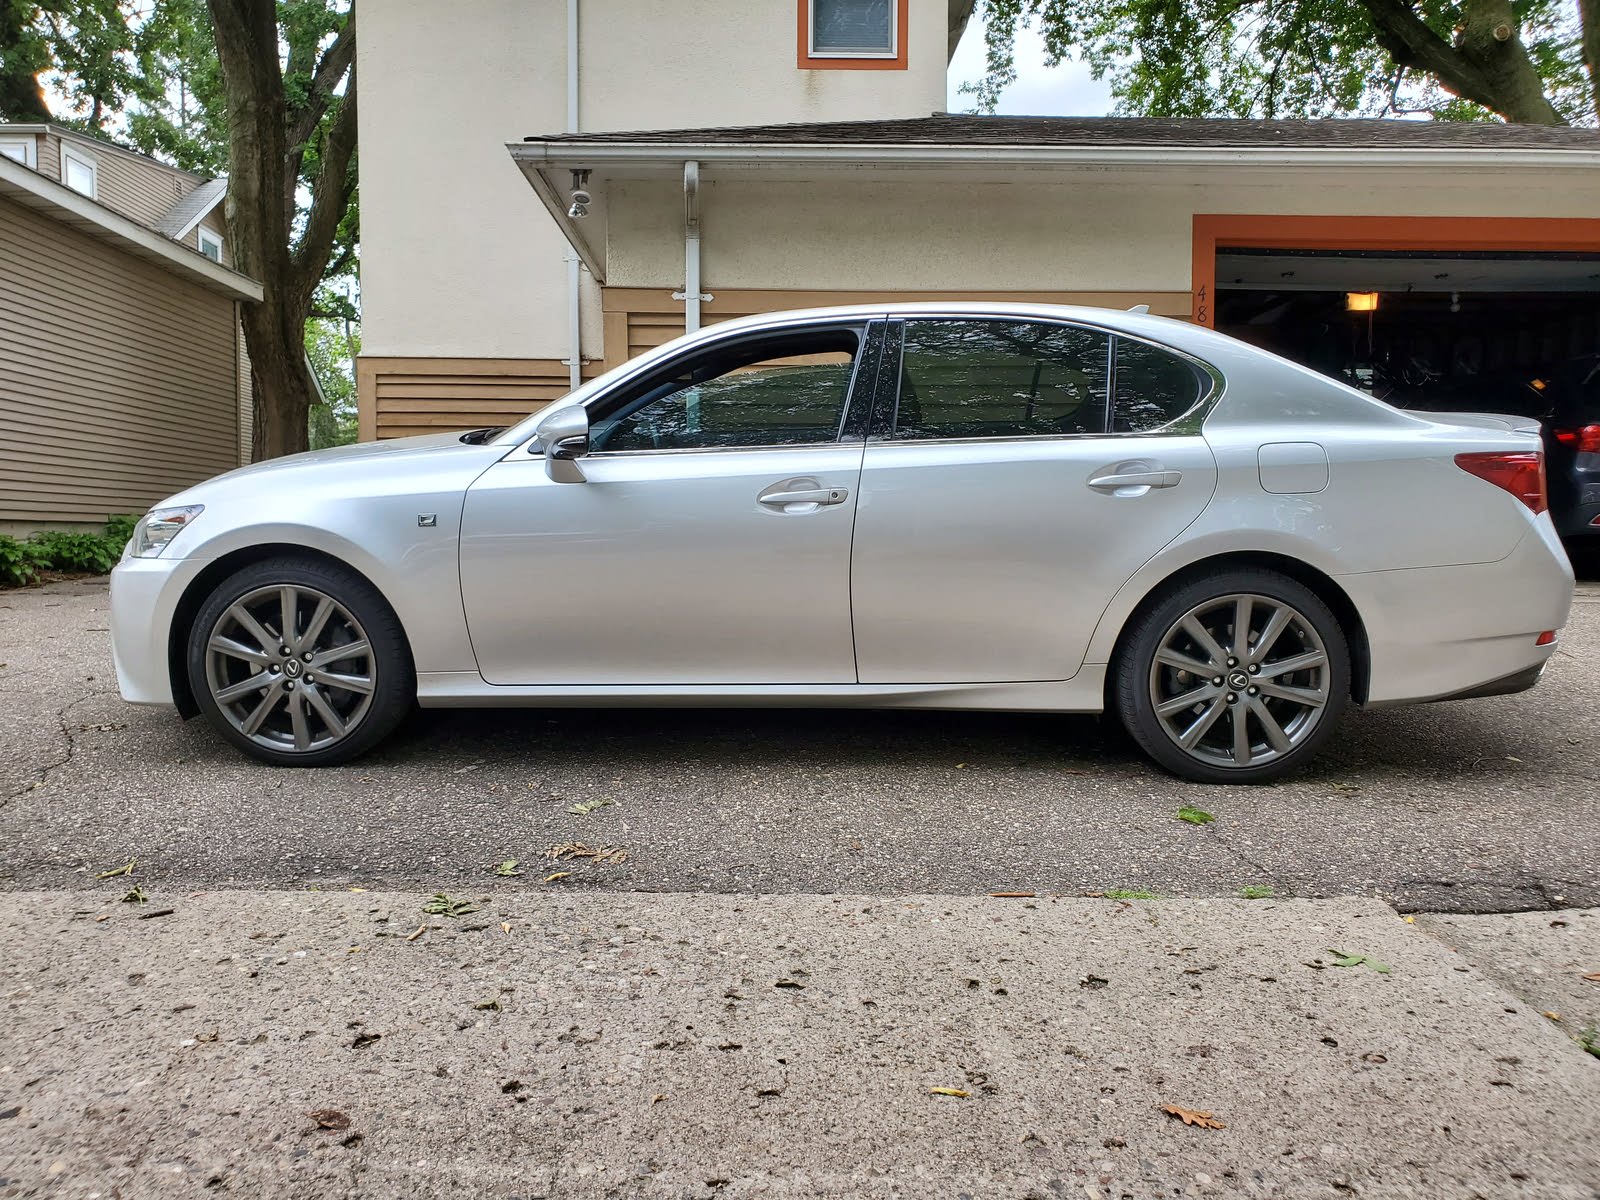 Used 13 Lexus Gs 350 For Sale With Photos Cargurus